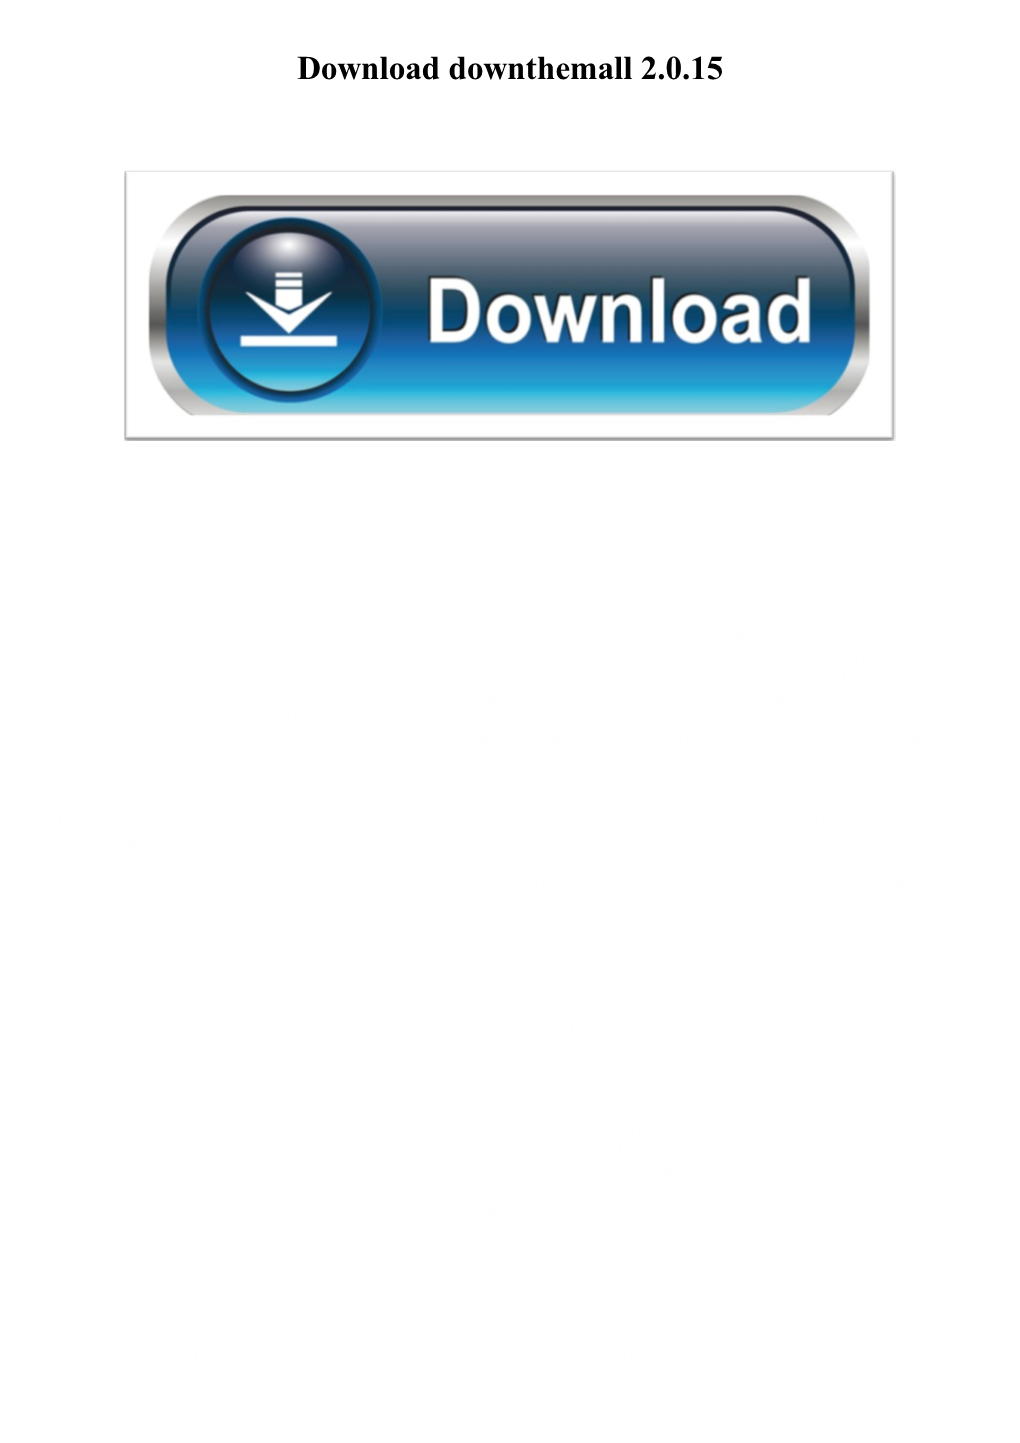 Download Downthemall 2.0.15